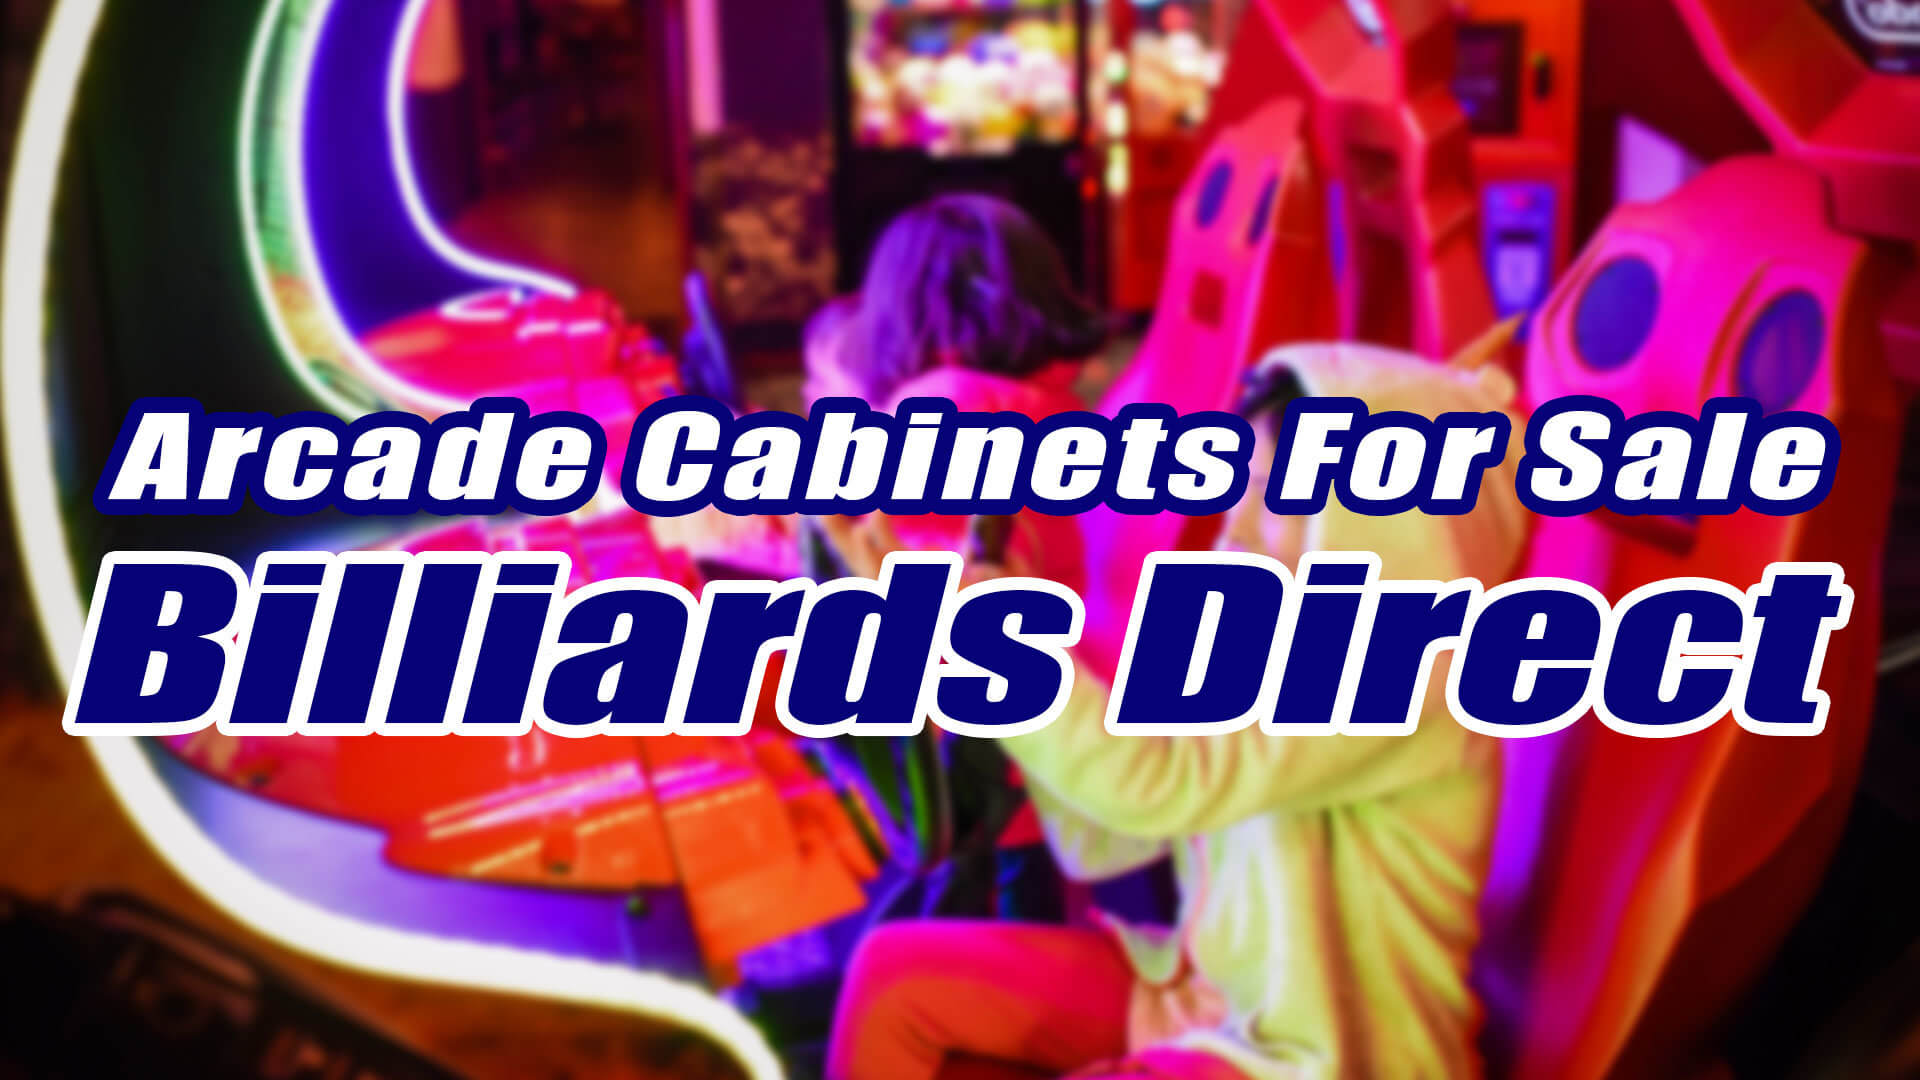 BLOG-Arcade-Cabinets-for-Sale